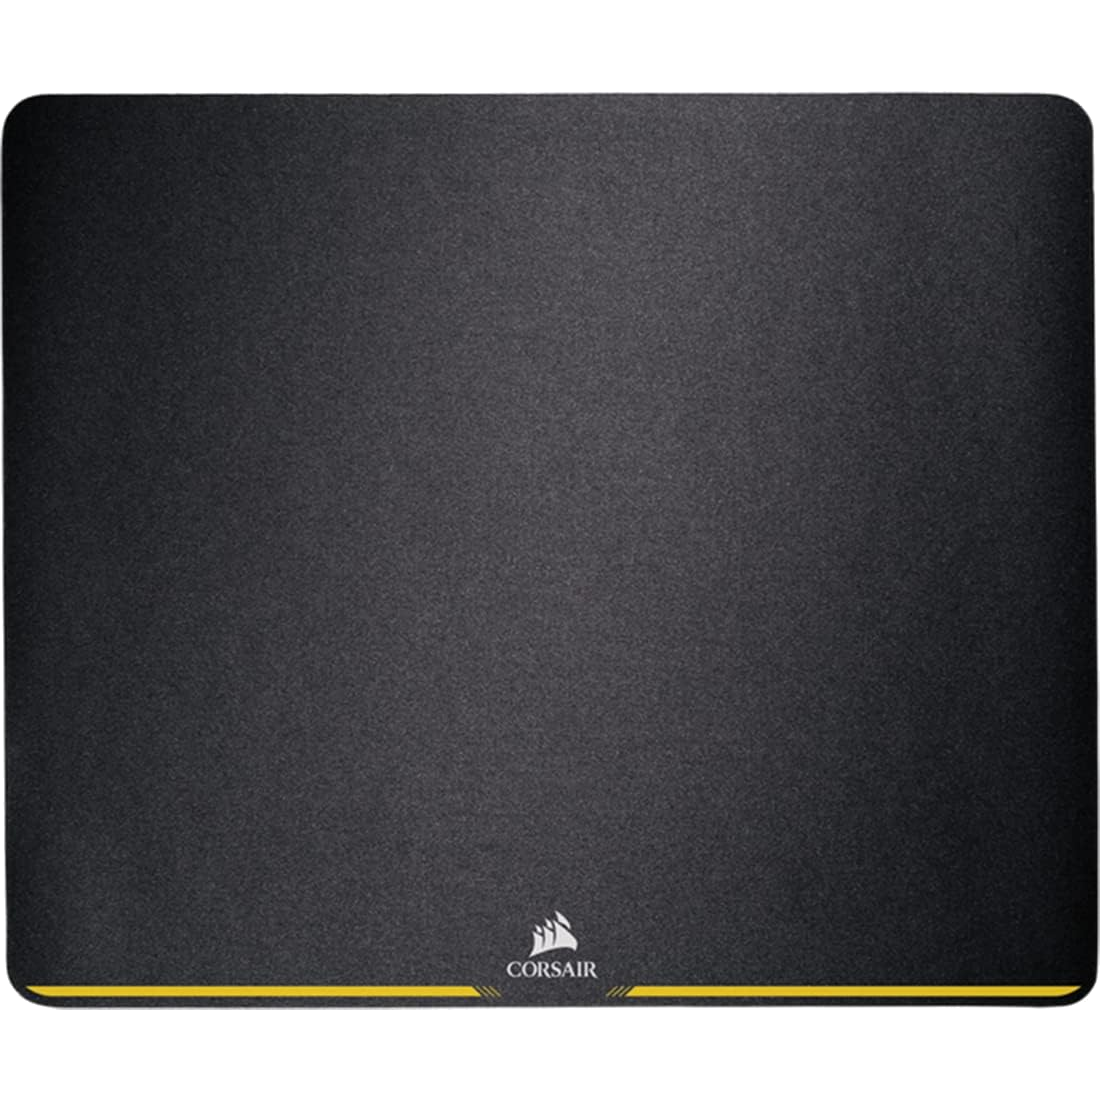 The Corsair MM200 mouse pad in black with a yellow accent stripe.